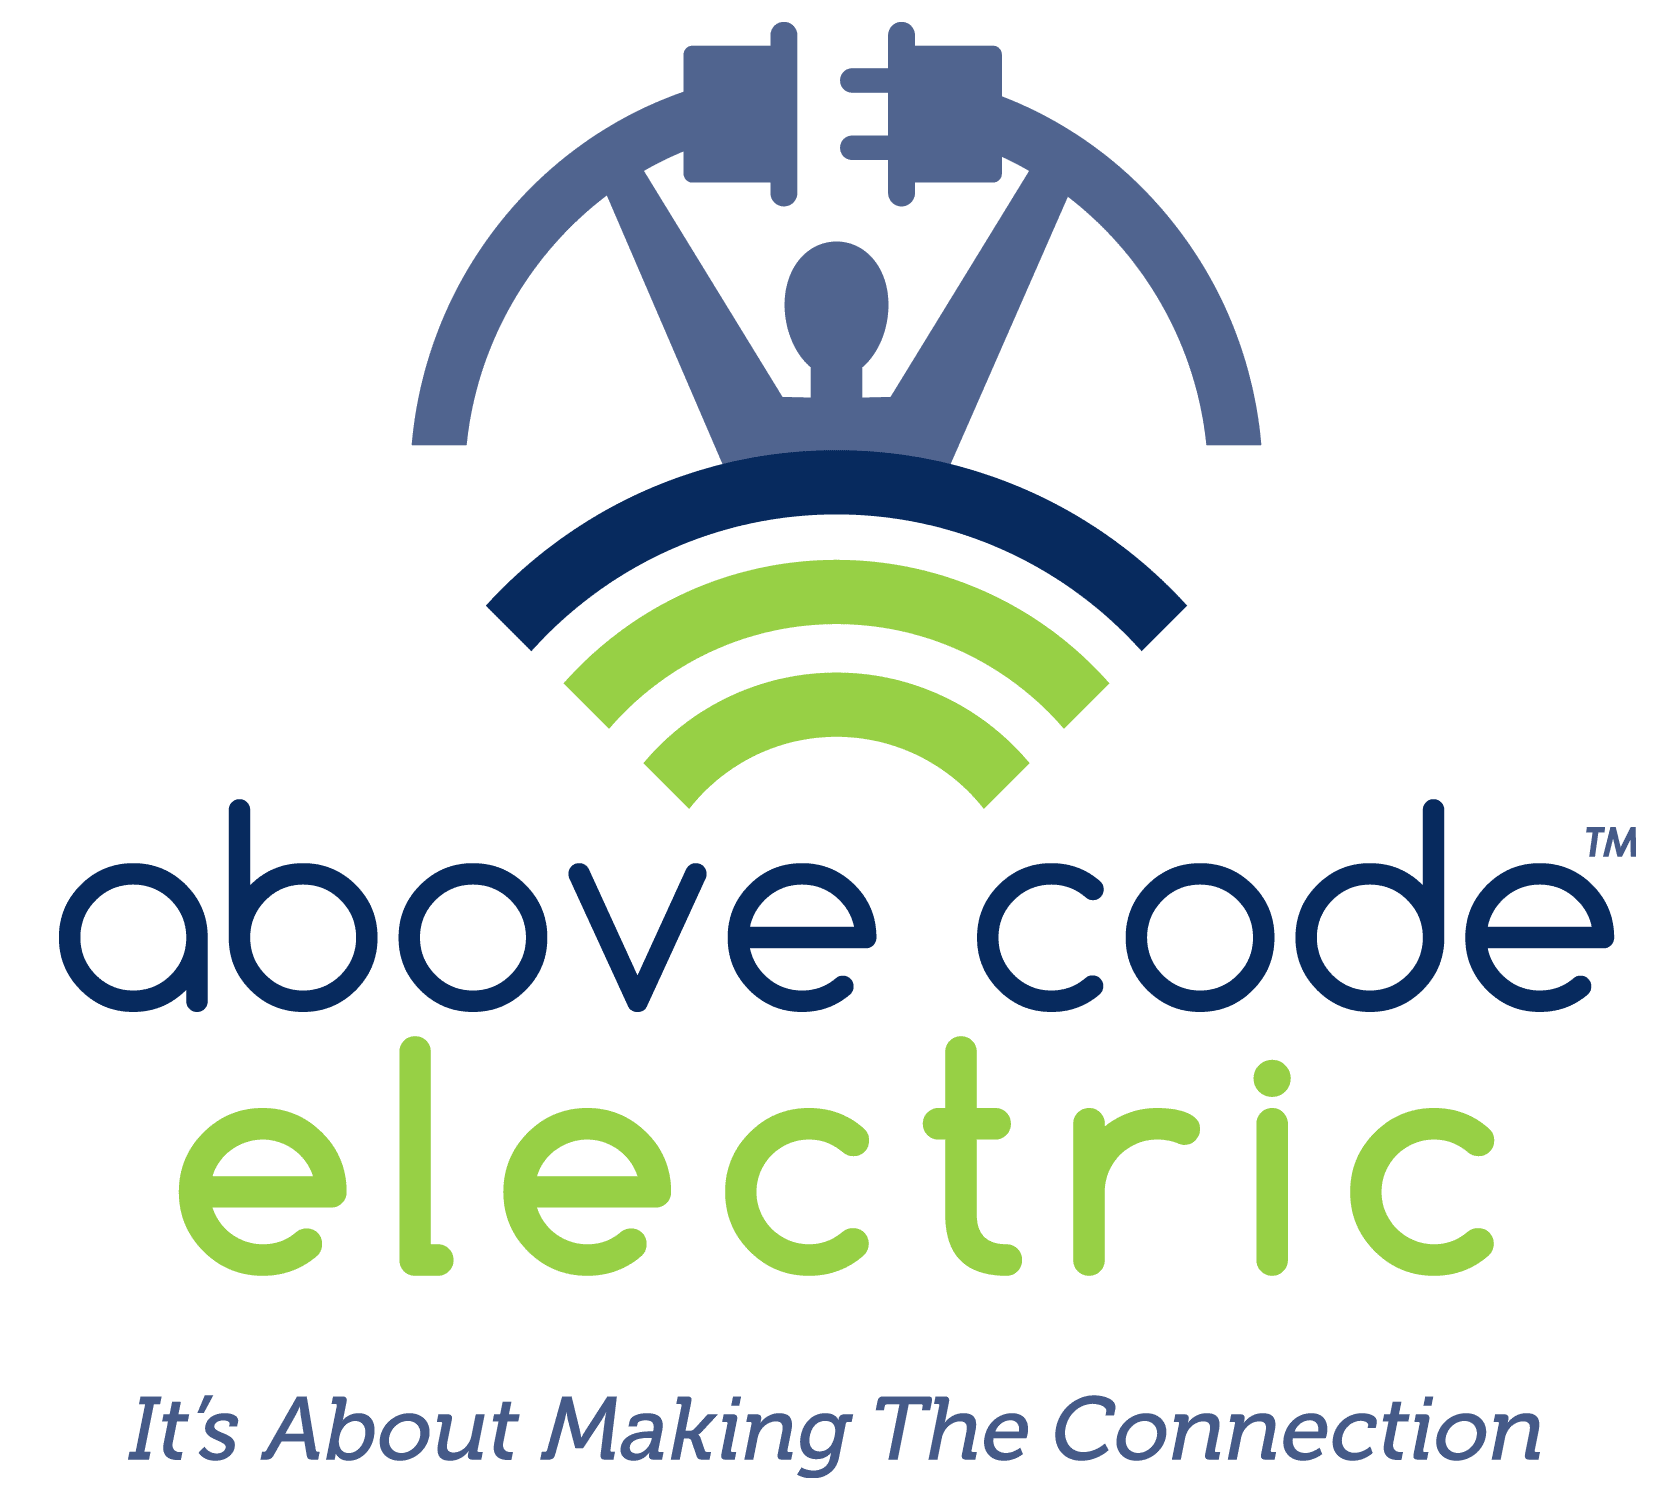 Above code electric logo.